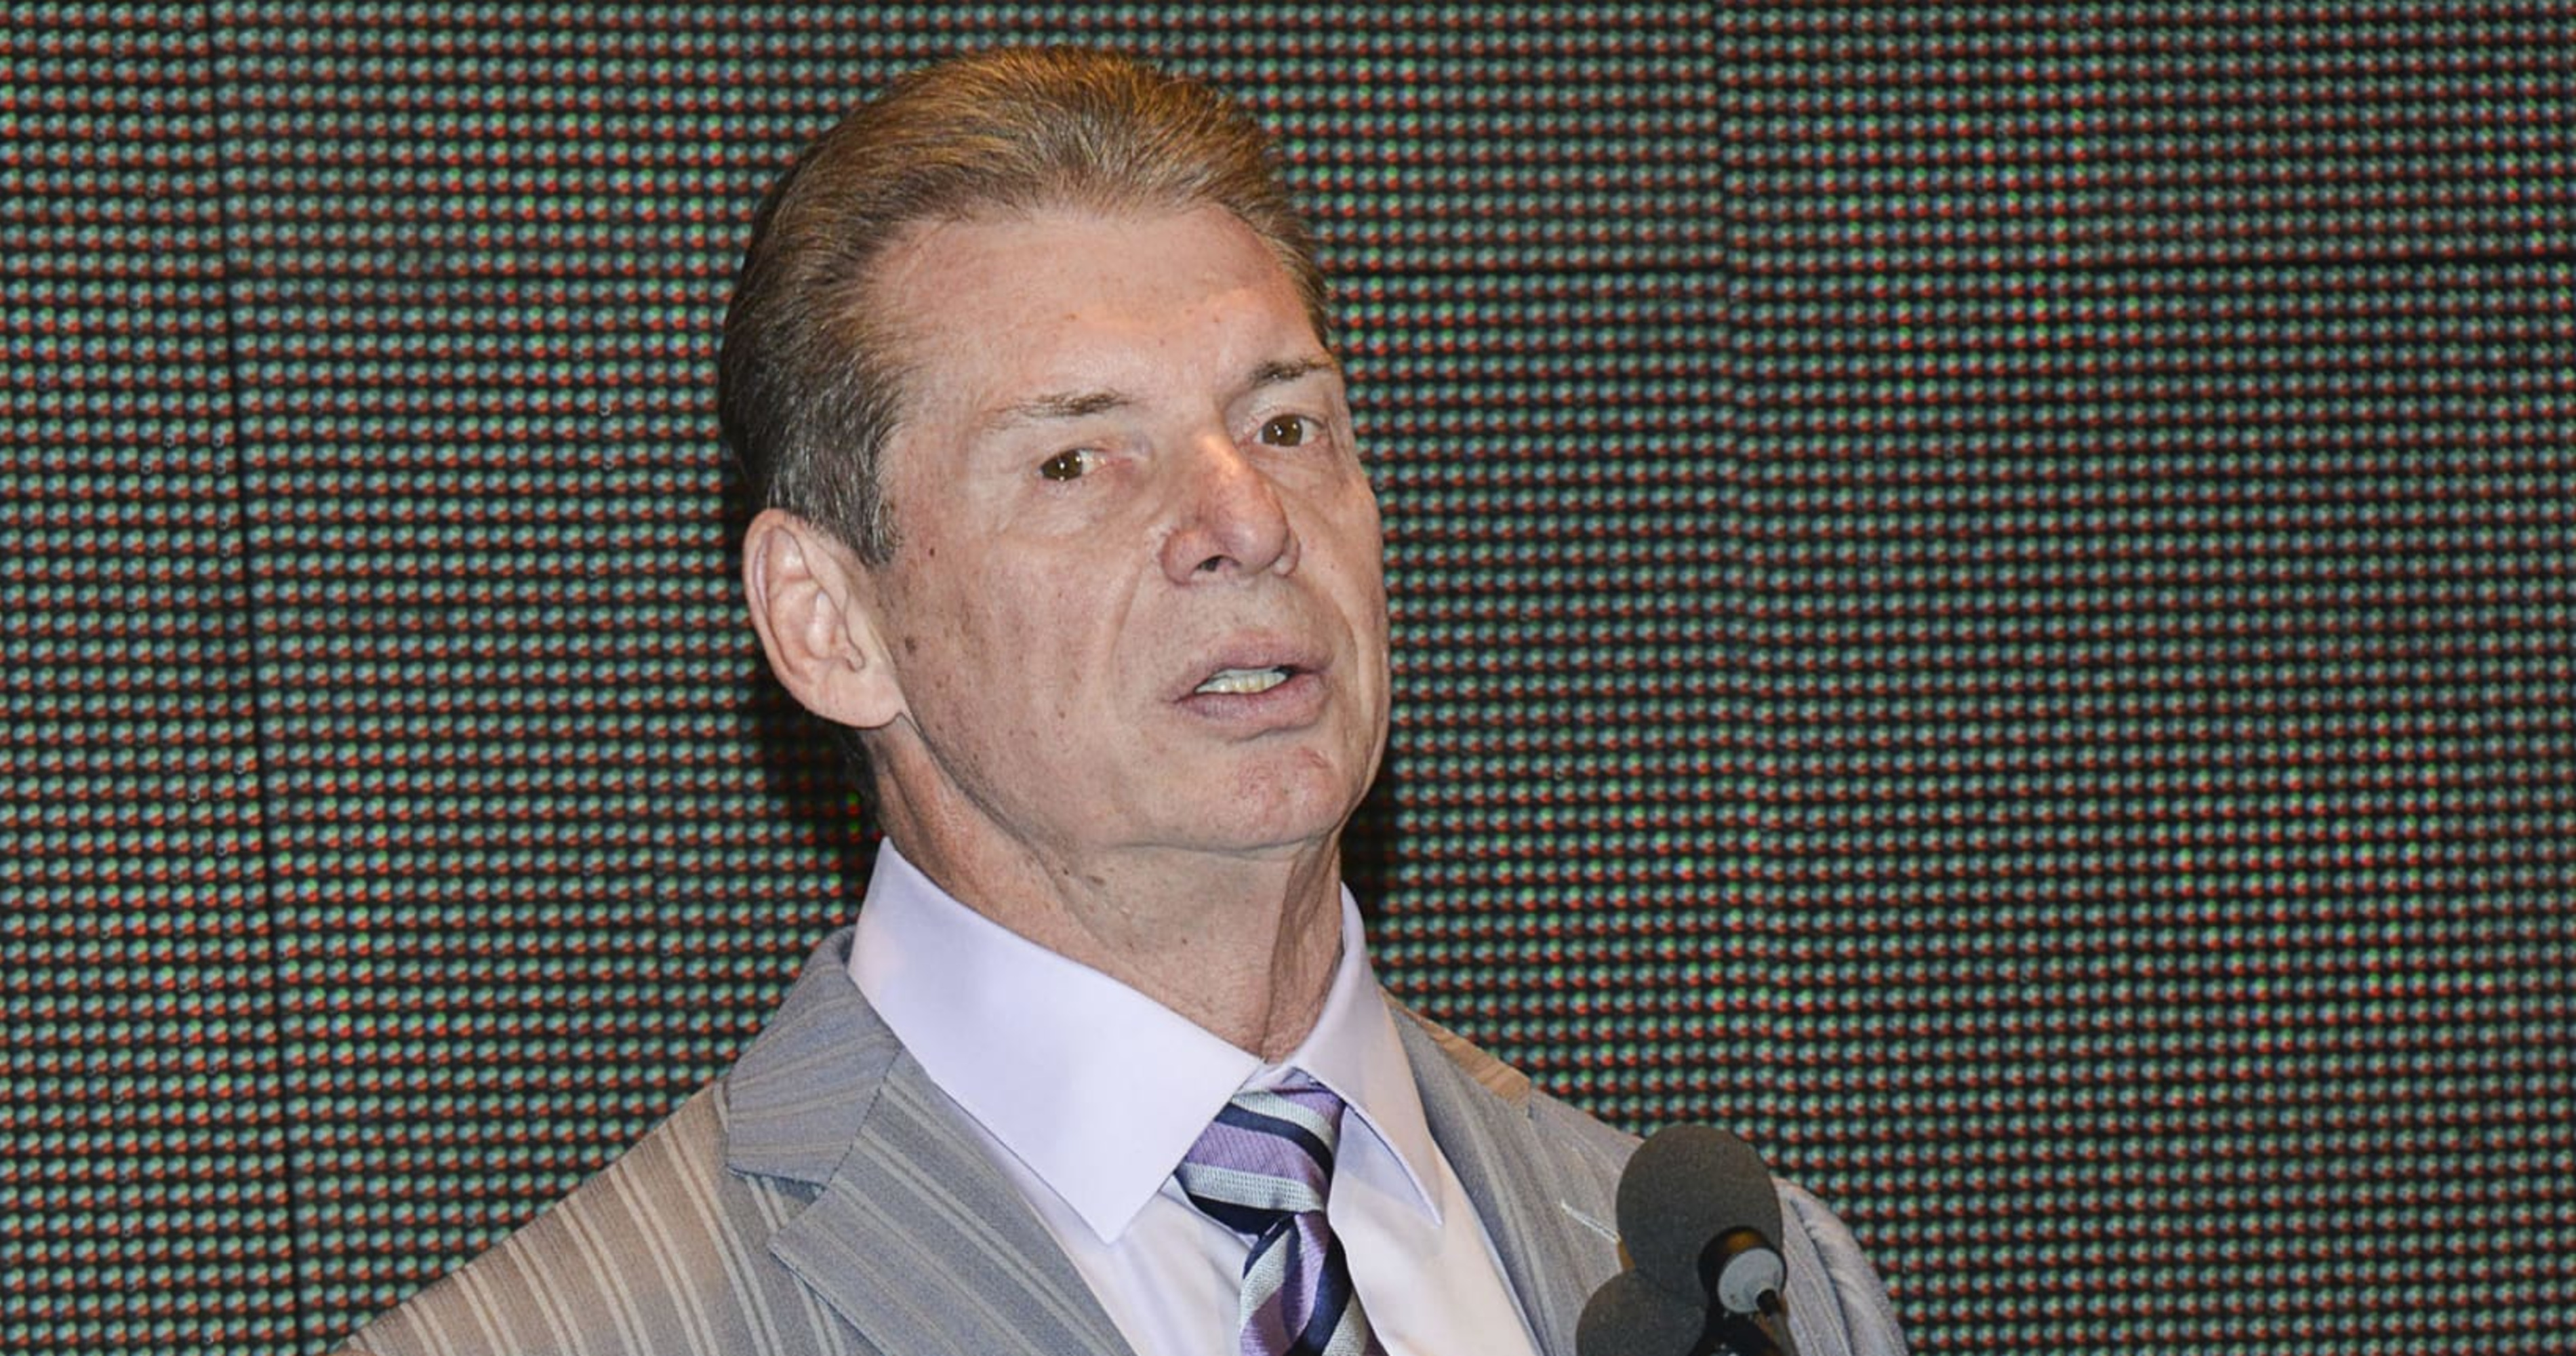 WWE: Vince McMahon's Personal Payments Totaled $19.6M amid Misconduct Allegation..